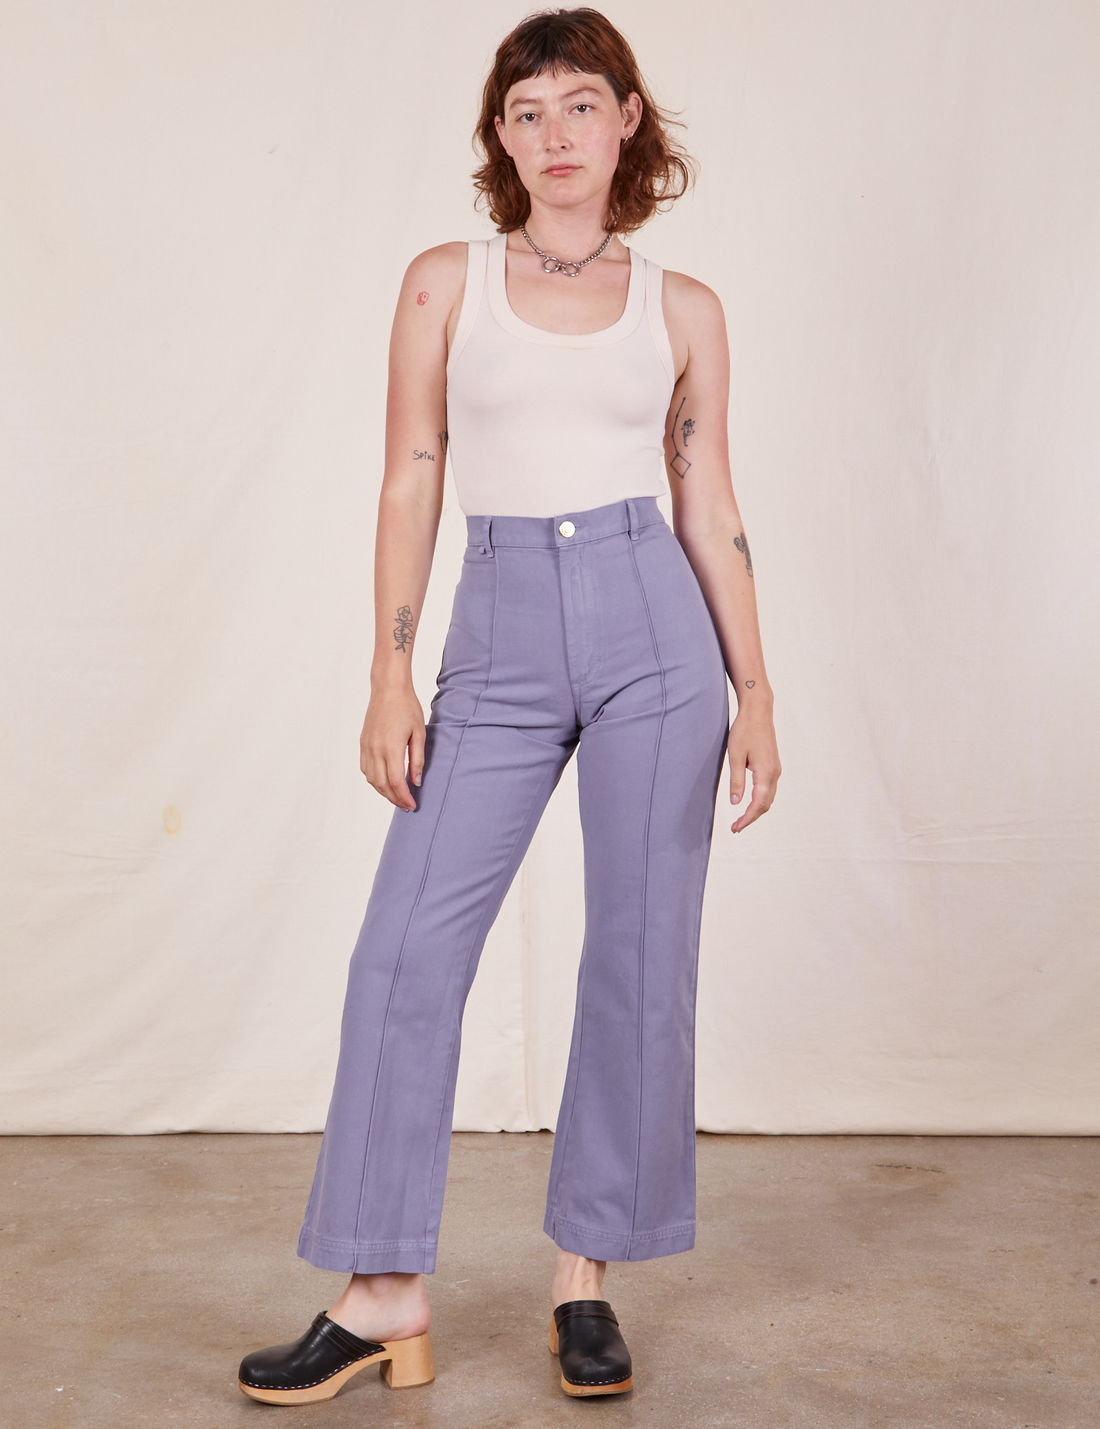 Alex is 5'8" and wearing XS Western Pants in Faded Grape paired with vintage off-white Tank Top